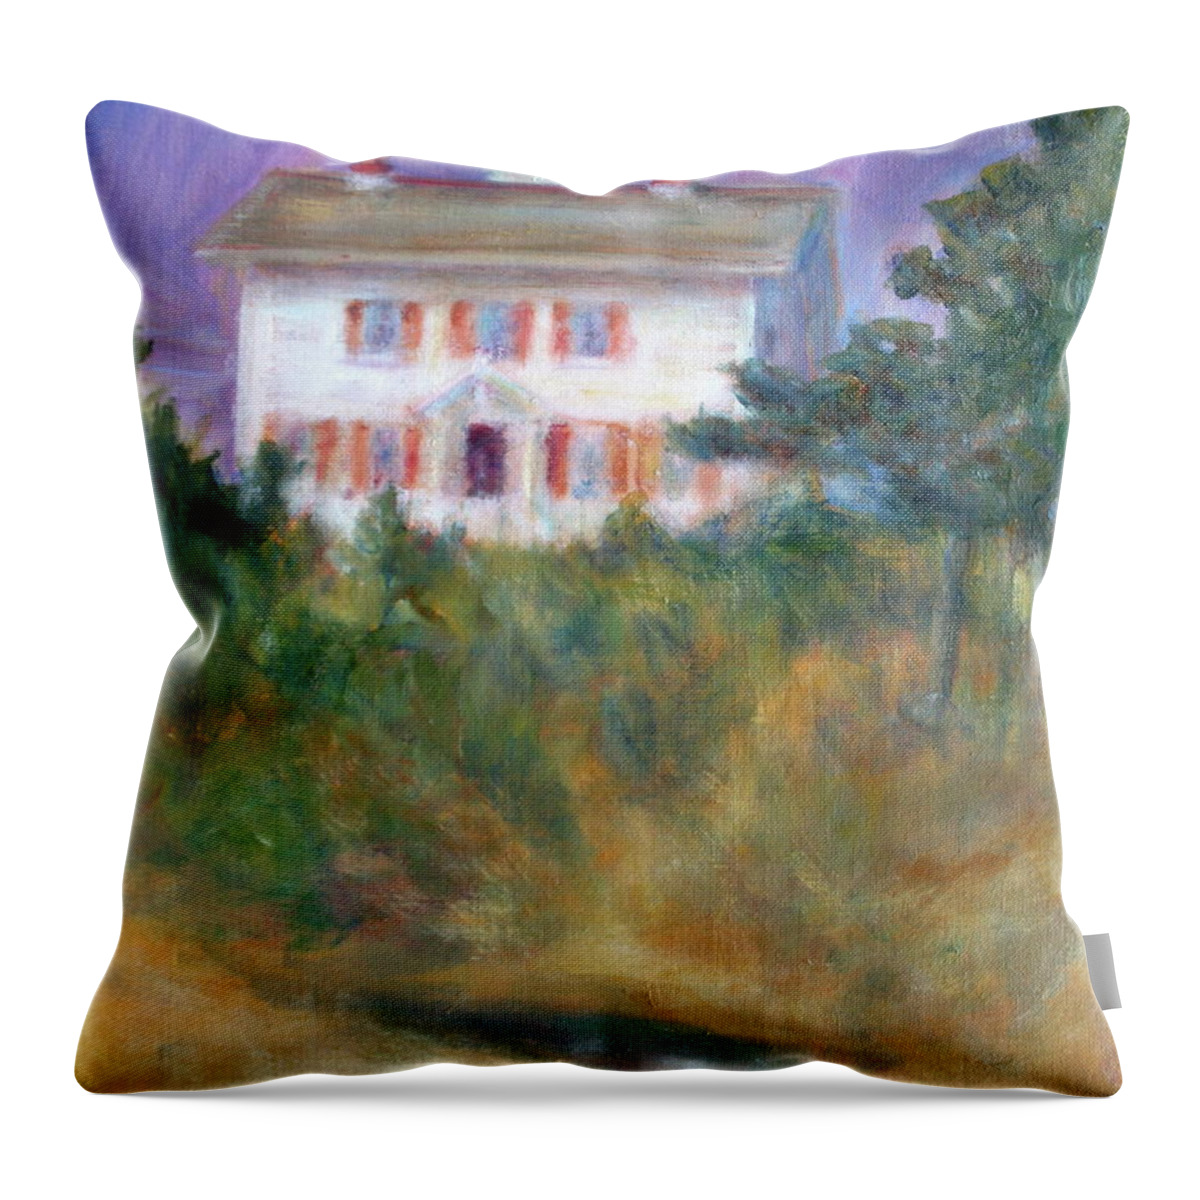 Lighthouse Throw Pillow featuring the painting Beacon on the Hill - Lighthouse Painting by Quin Sweetman